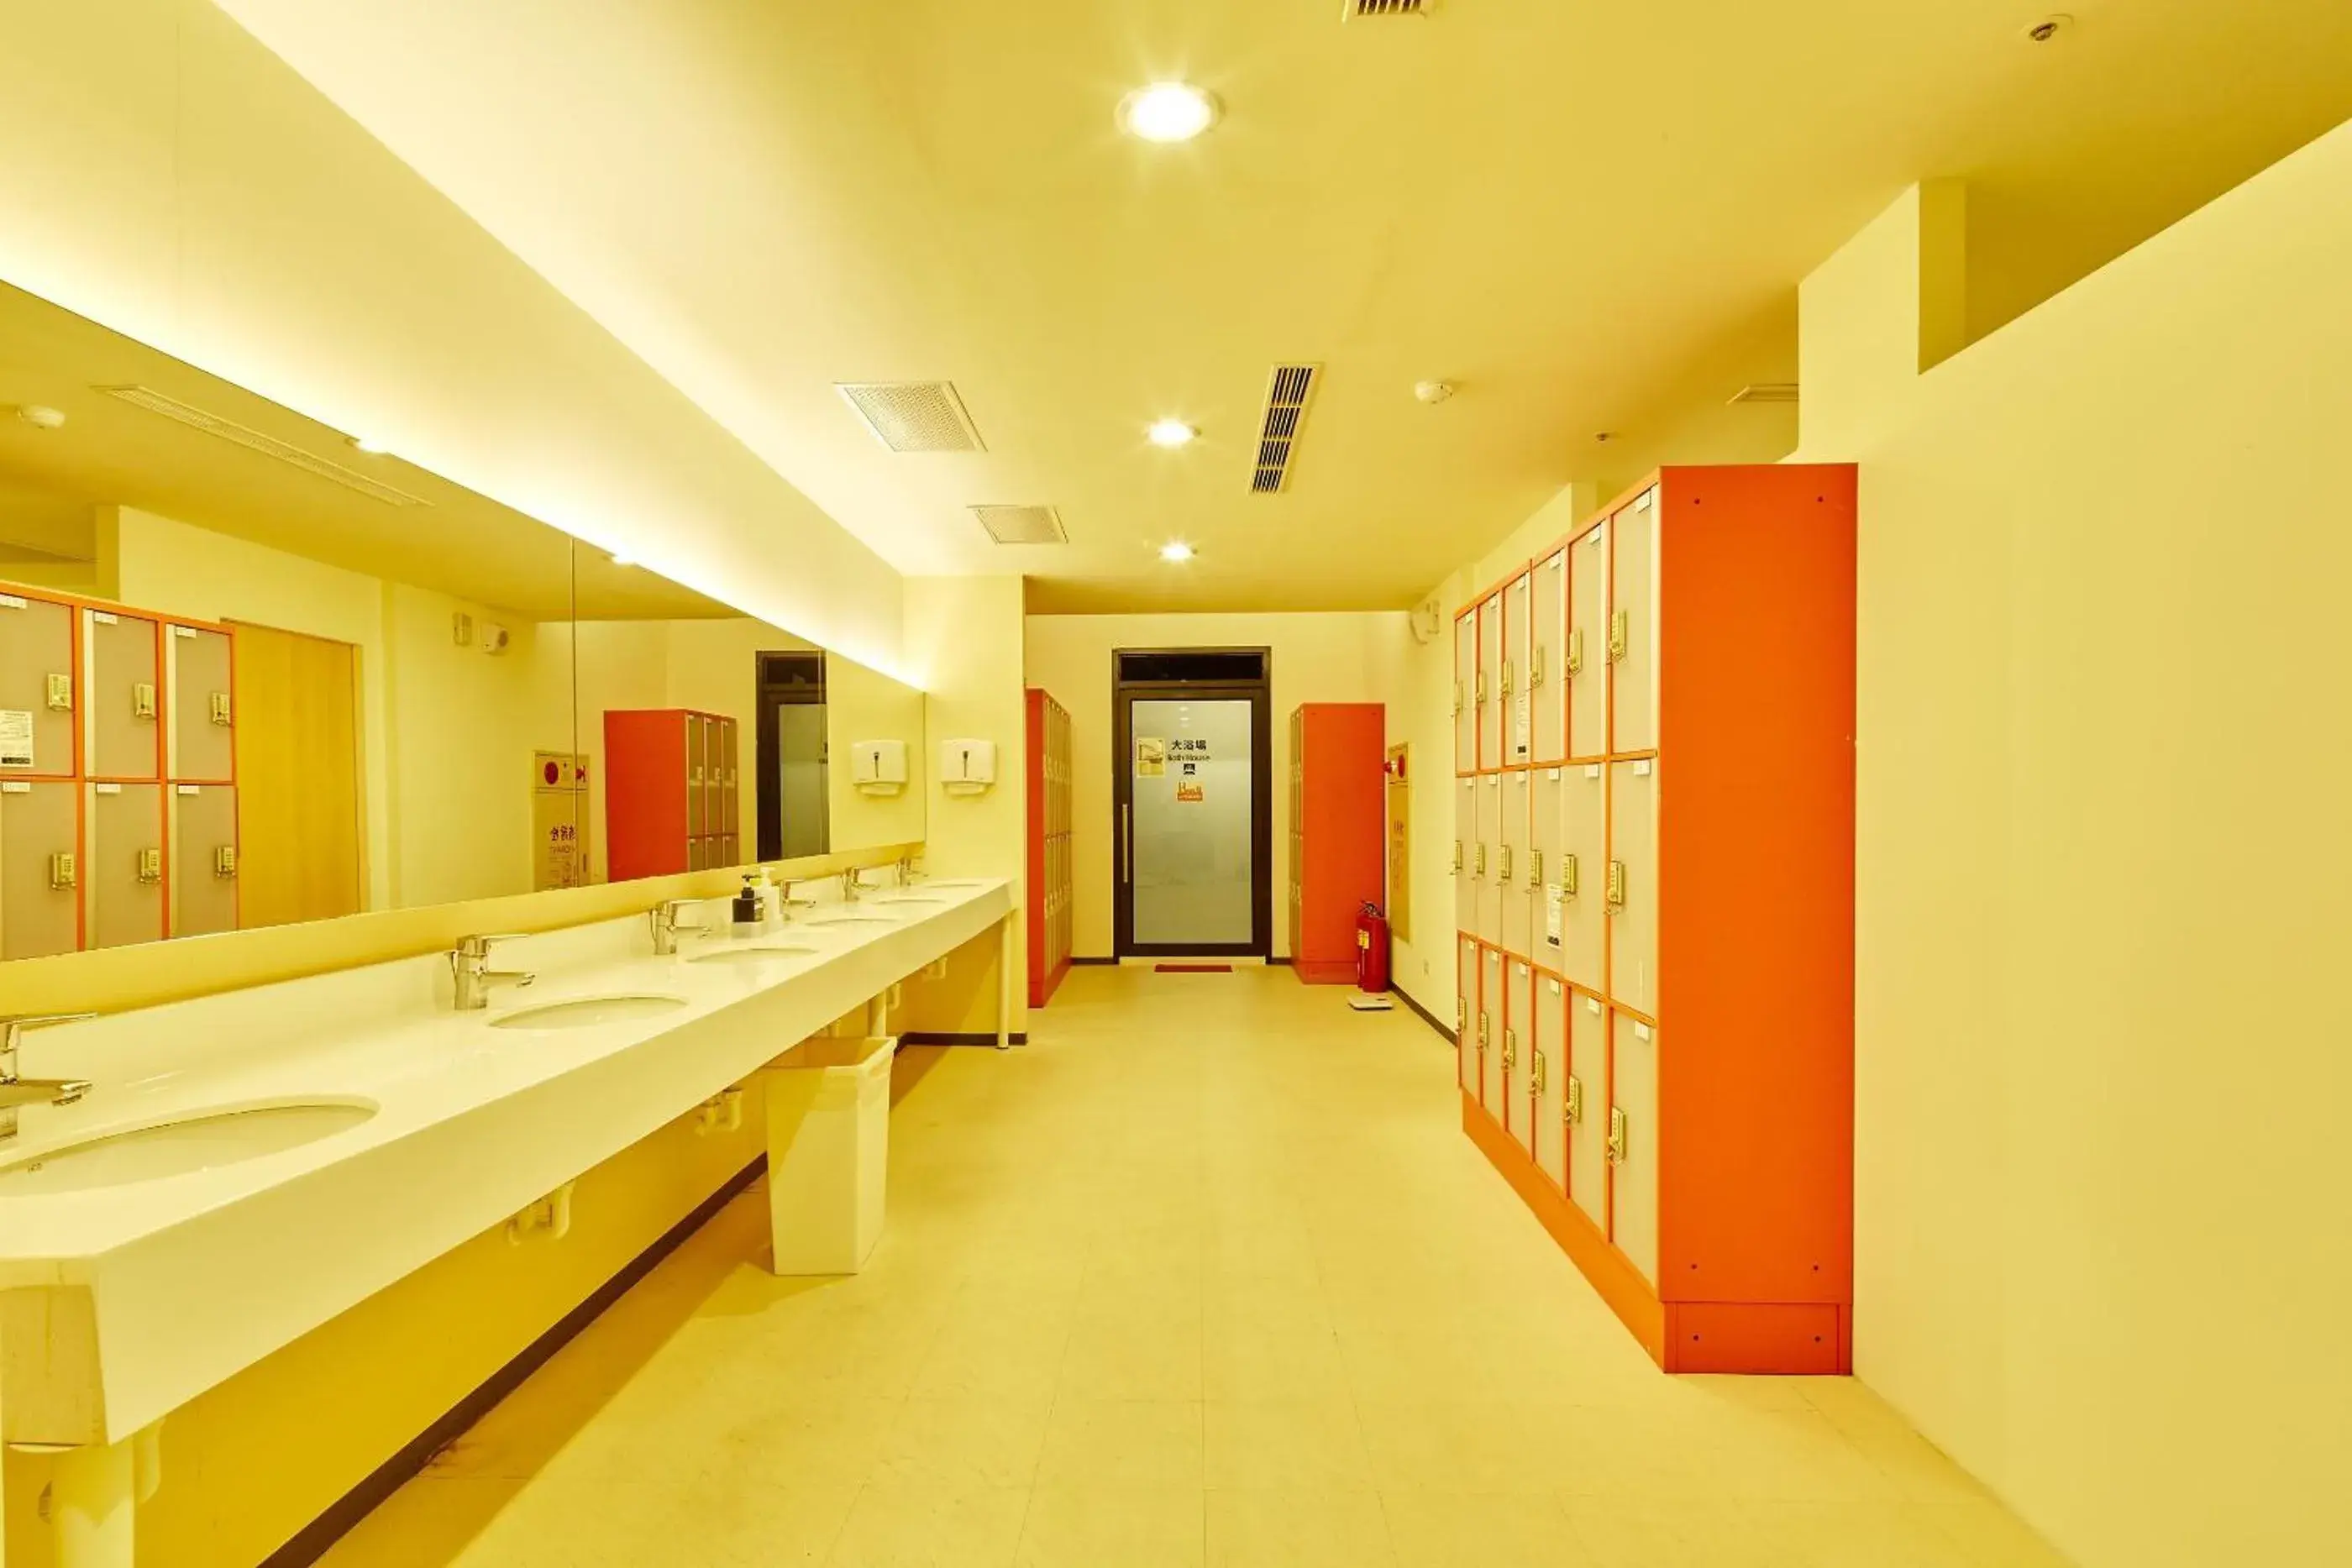 Area and facilities in Single Inn Kaohsiung